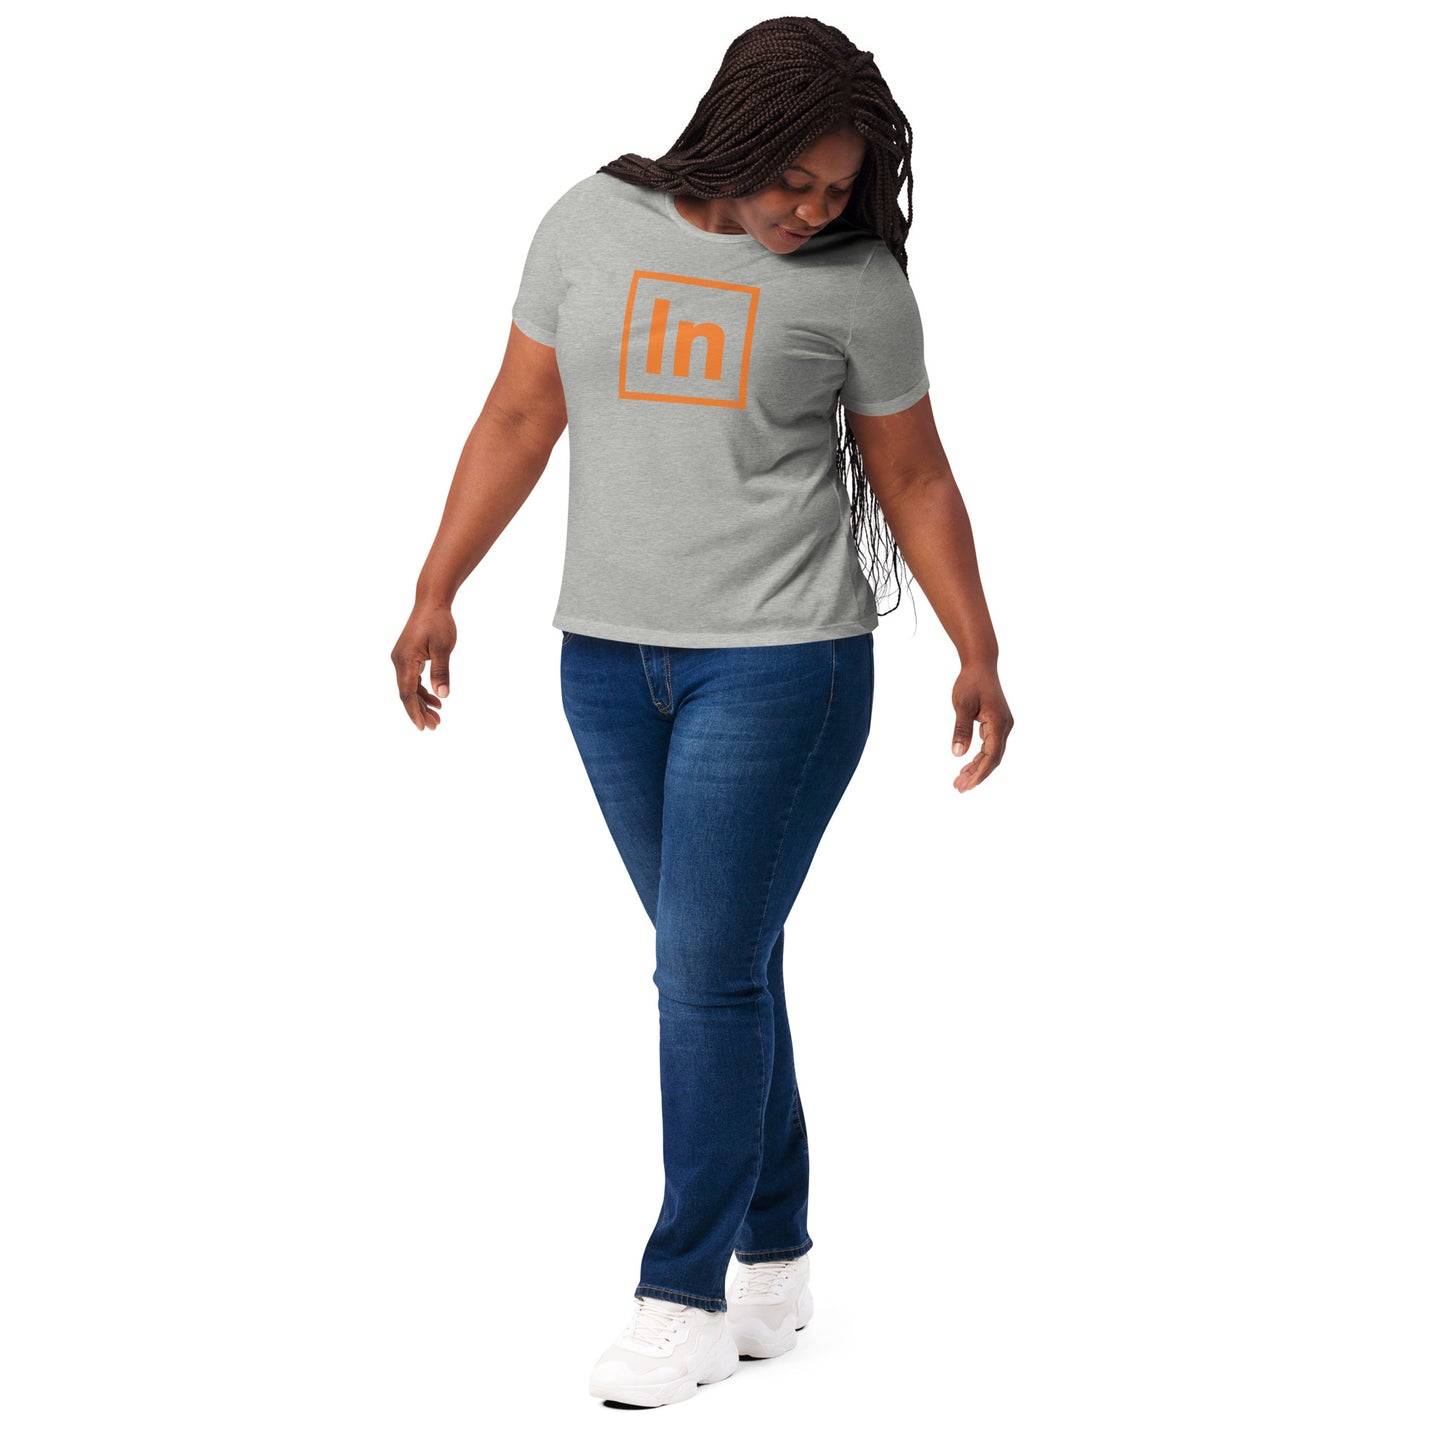 Women’s Extra-soft Tri-blend T-shirt - "In"